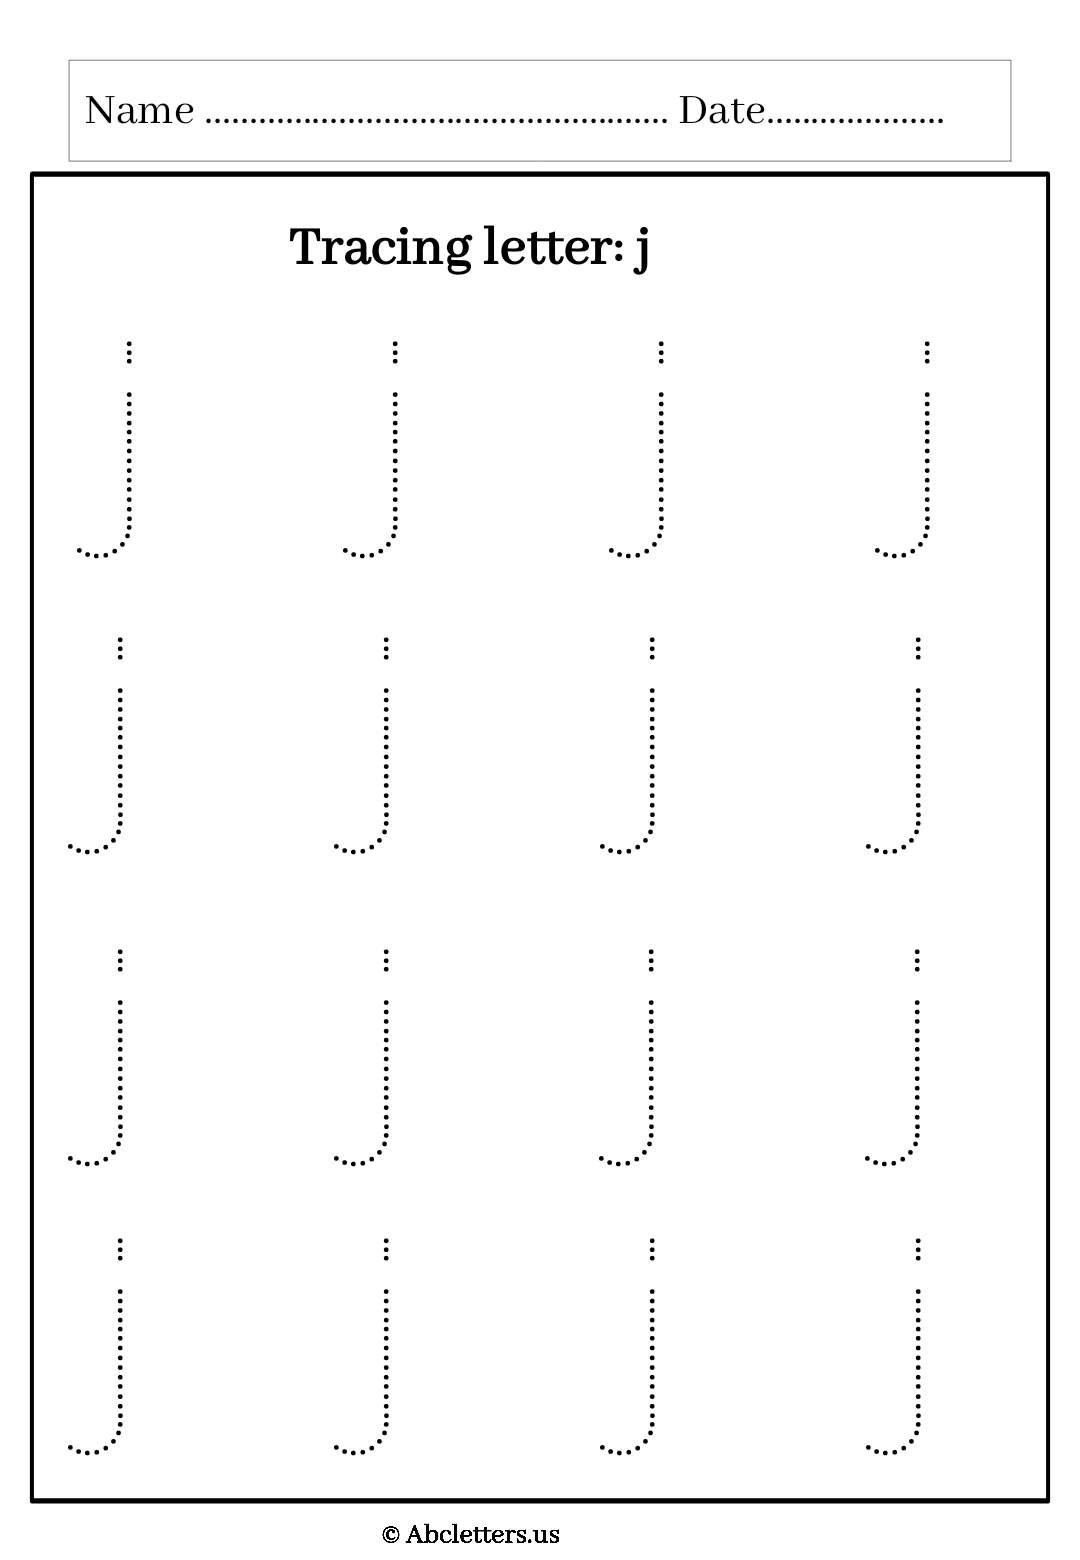 Tracing letter j lowercase